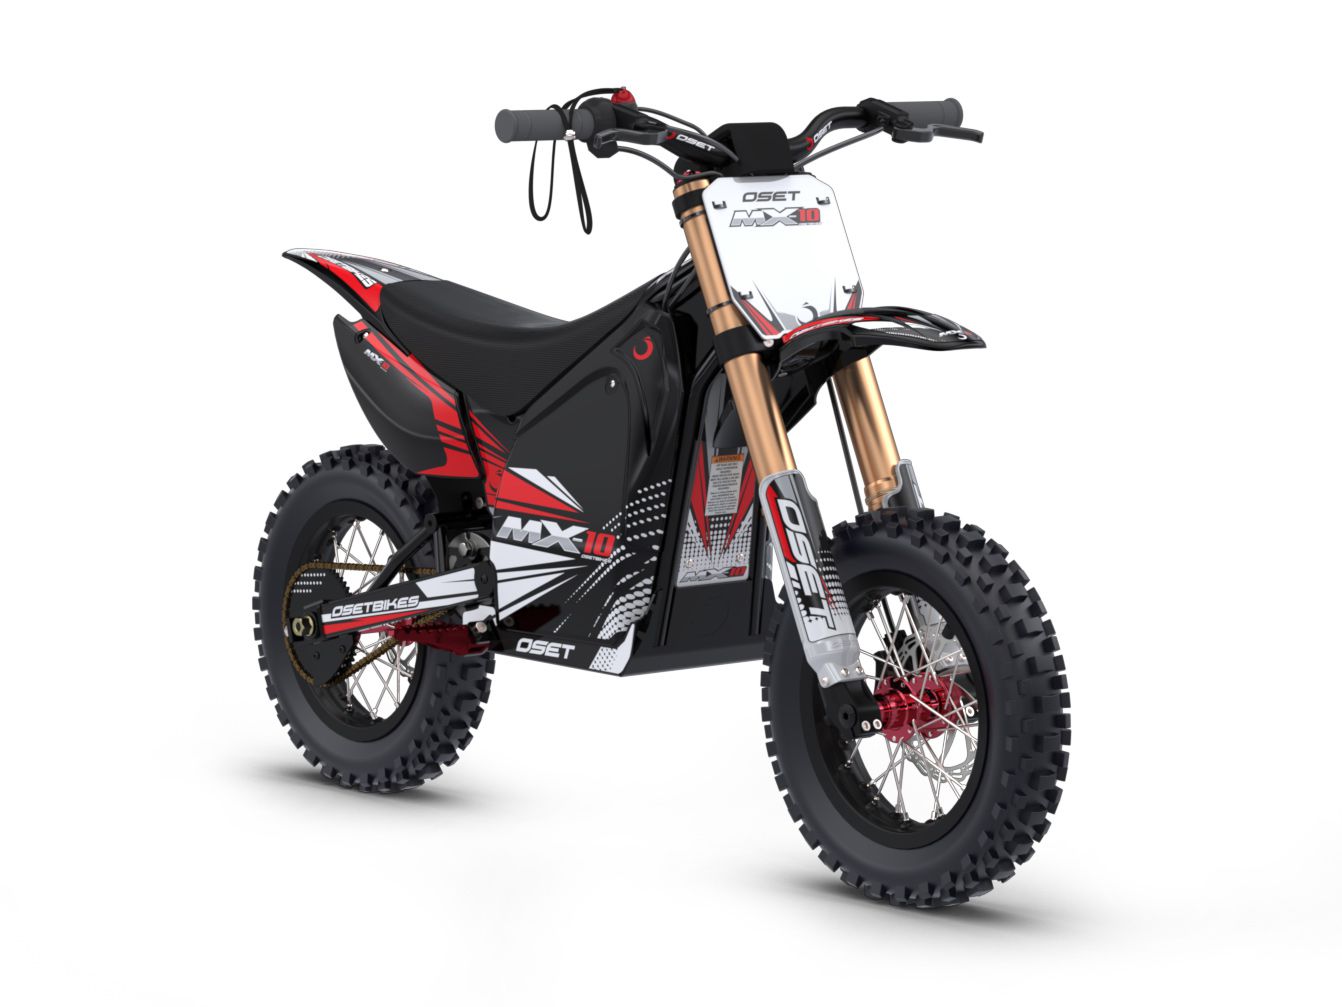 Adjustability abounds. On the MX-10 Off Road you can fine-tune everything from seat height and ground clearance to suspension adjustments and brake lever distance.